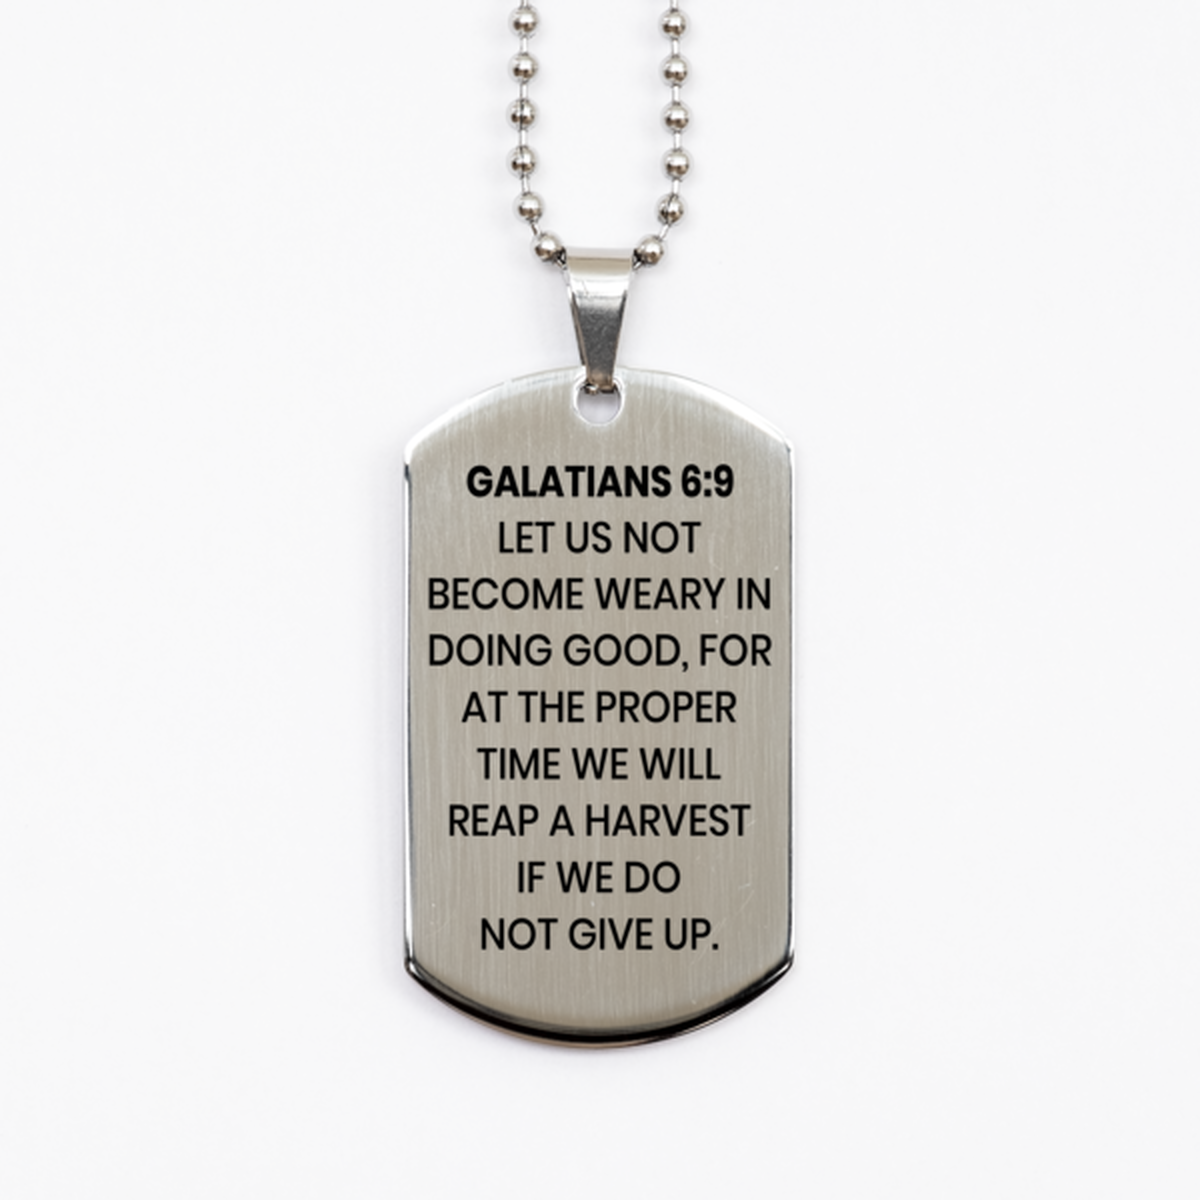 Galatians 6:9 Necklace, Bible Verse Necklace, Christian Necklace, Christian Birthday Gift, Stainless Steel Dog Tag Necklace, Gift for Christian.